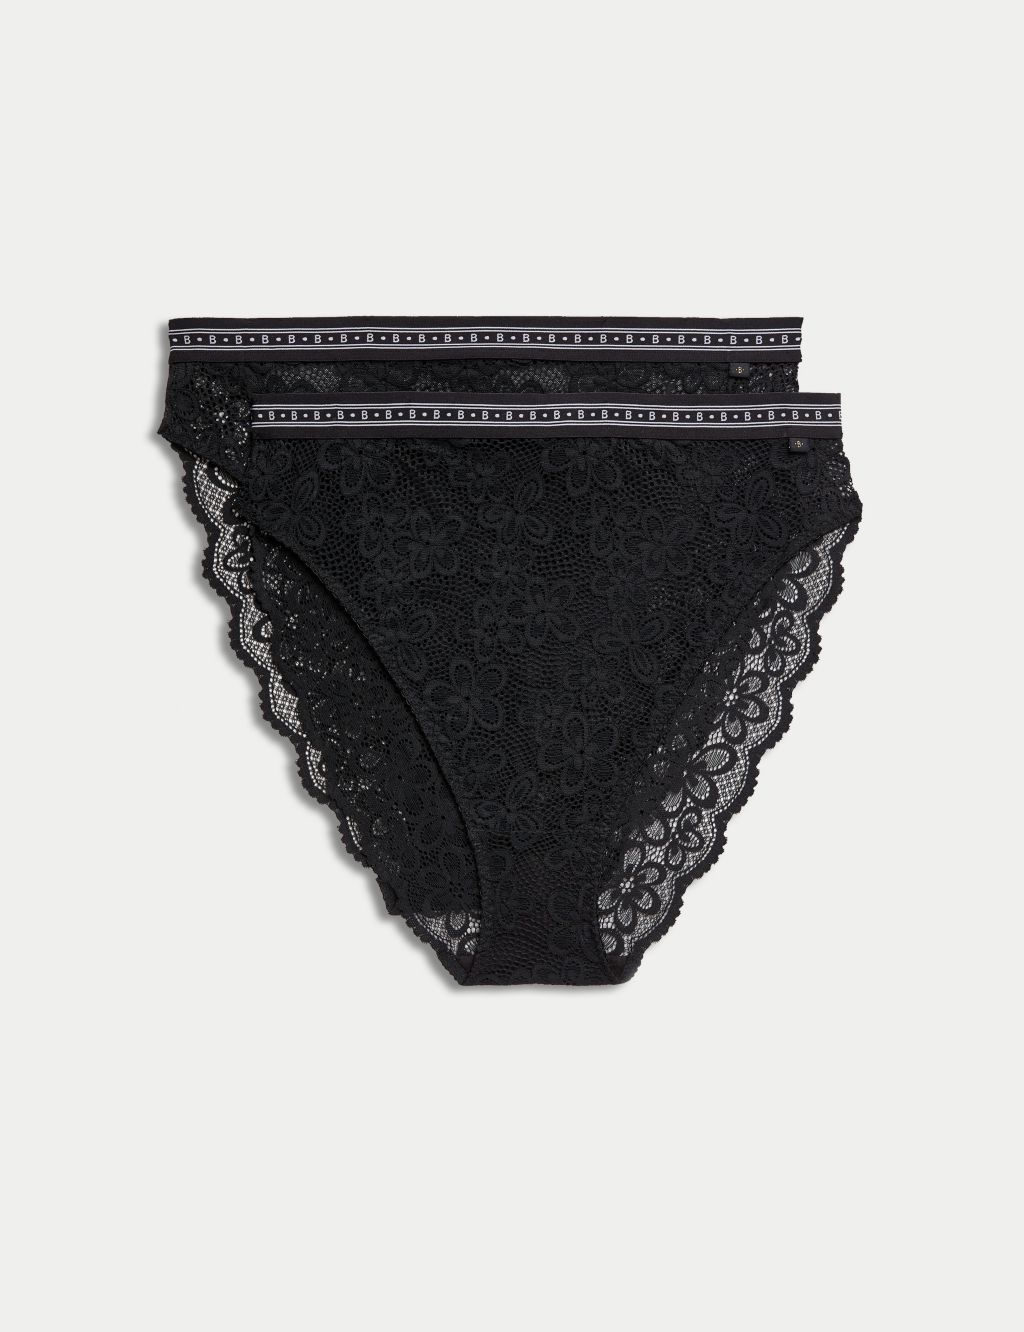 Pack of 2 microfibre knickers black with polka dots La Redoute